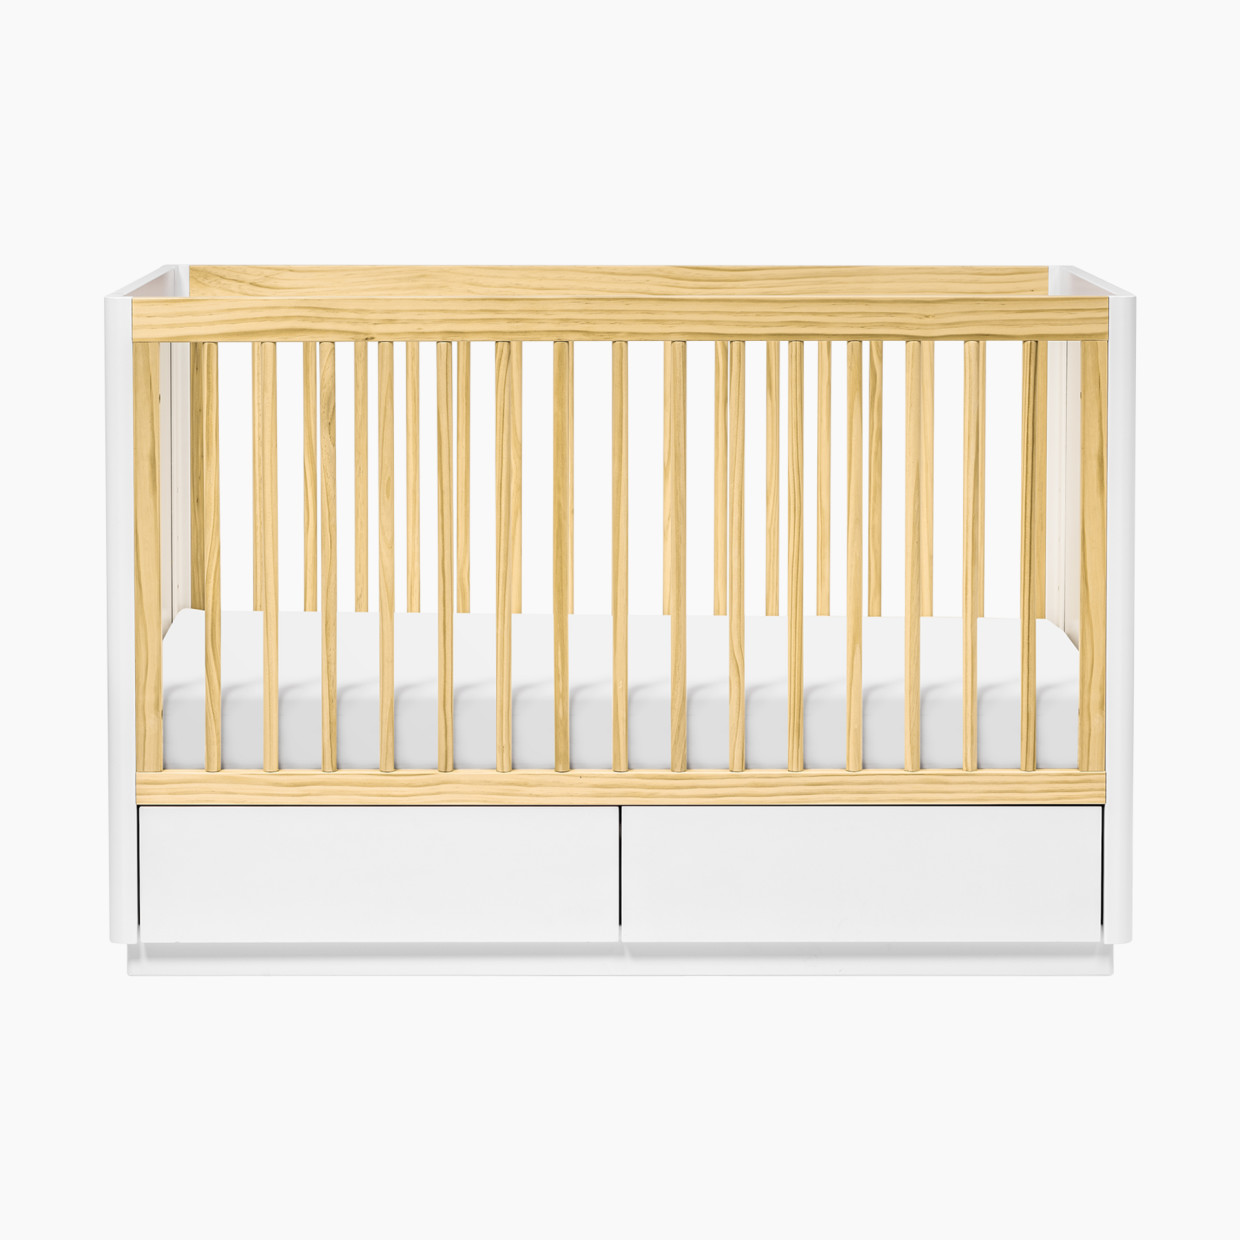 babyletto Bento 3-in-1 Storage Crib with Toddler Bed Conversion Kit - White/Natural.